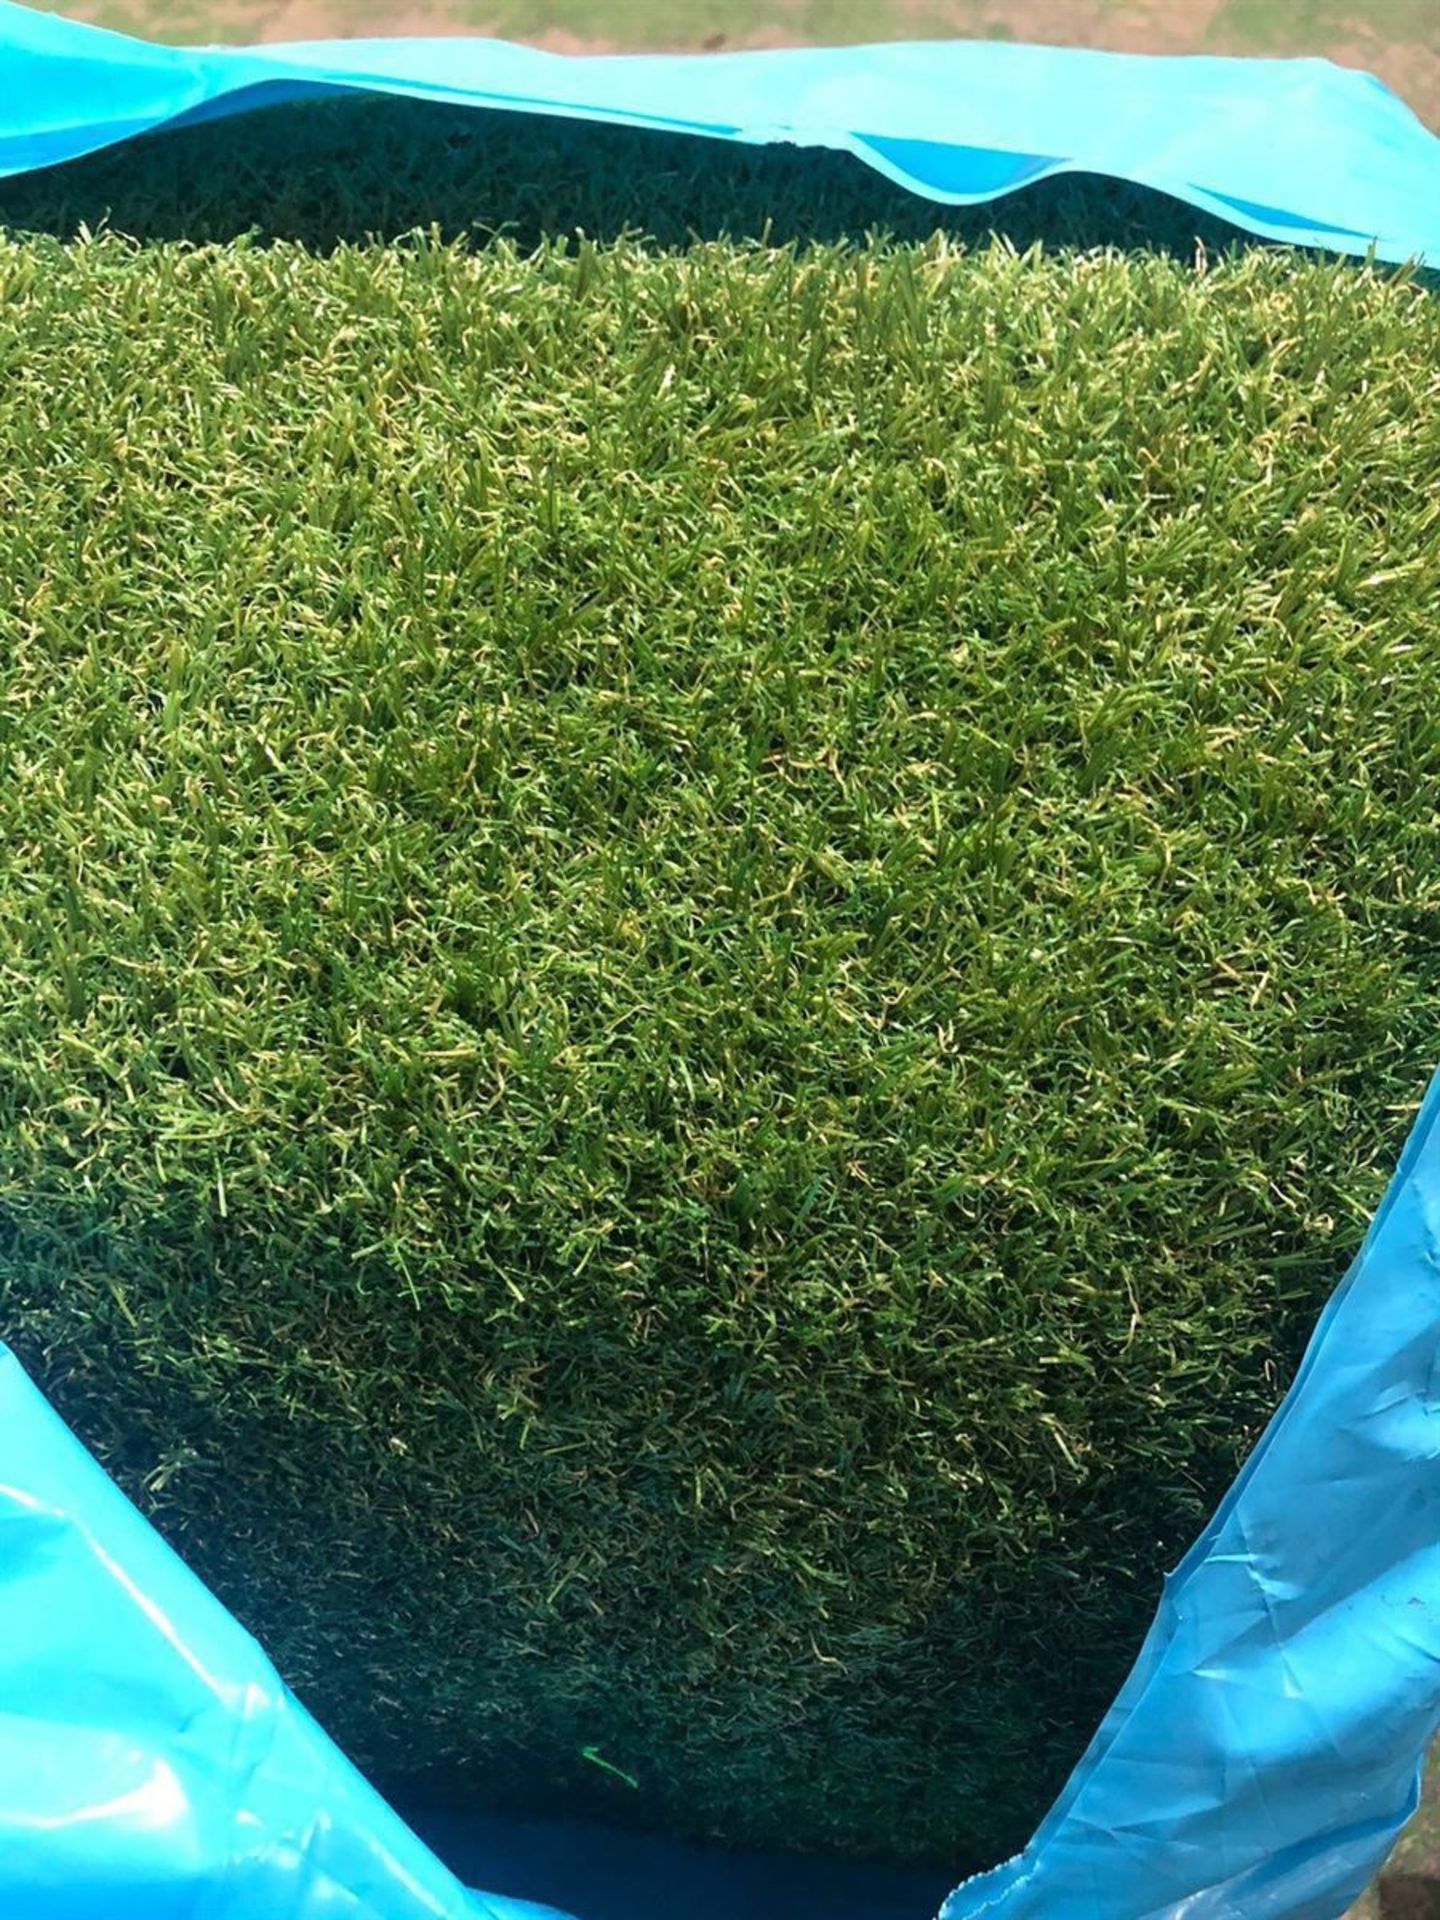 25m x 4m total 100m2 Heavy-Duty G5 35mm on a 2mm Width Artificial Grass - Image 2 of 3